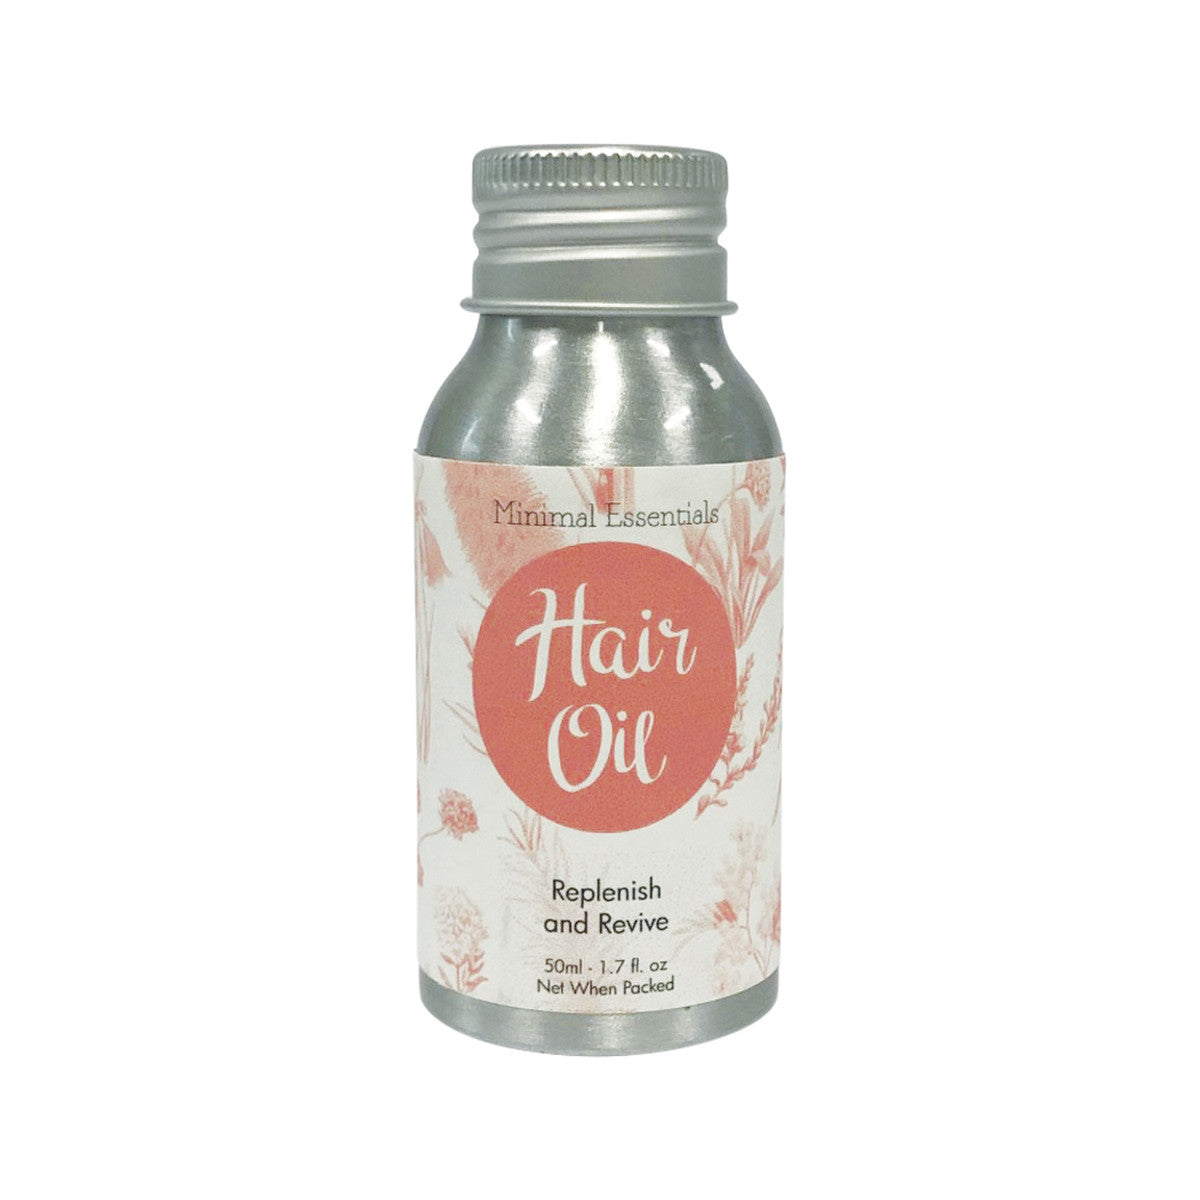 Minimal Essentials - Hair Oil (Replenish and Revive)